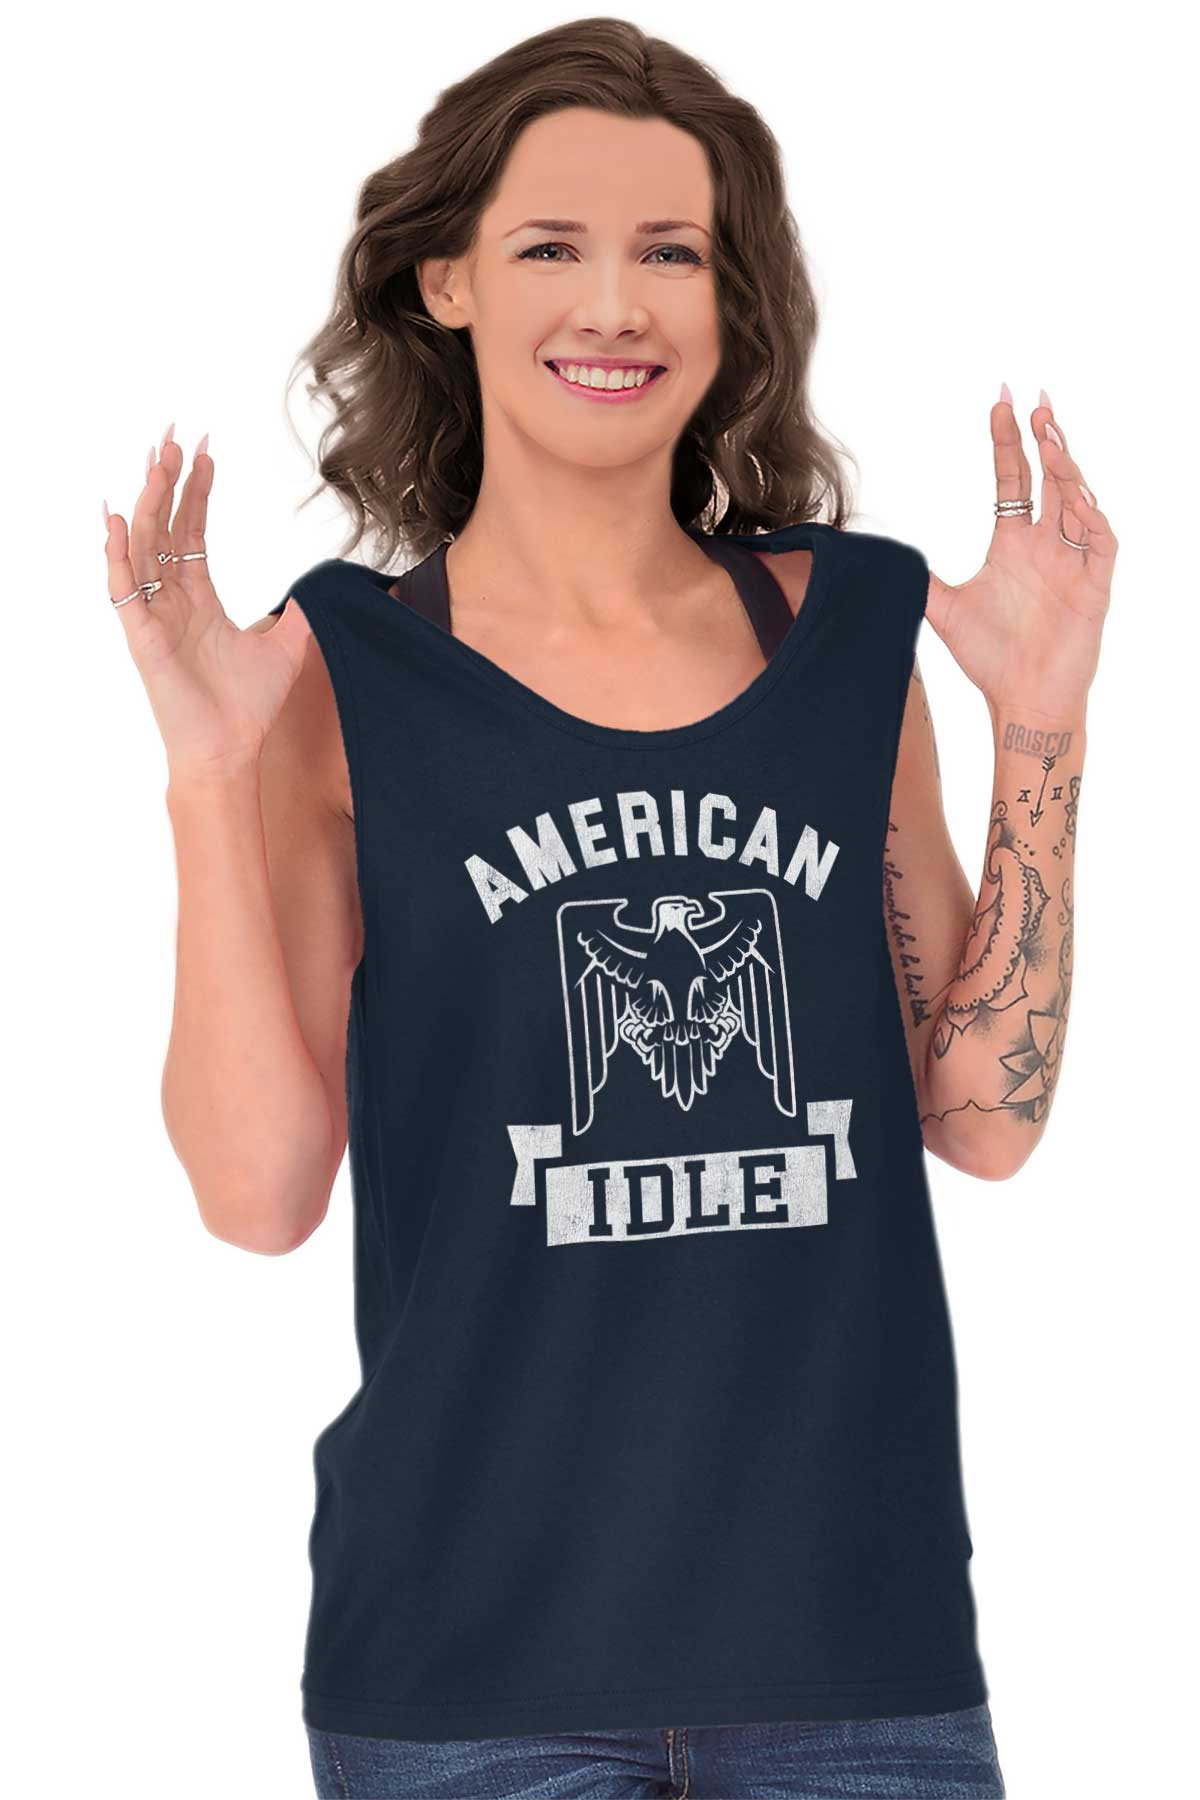 American Idle USA Graphic Novelty Gift Idea Adult Tank Top Sleeveless T ...